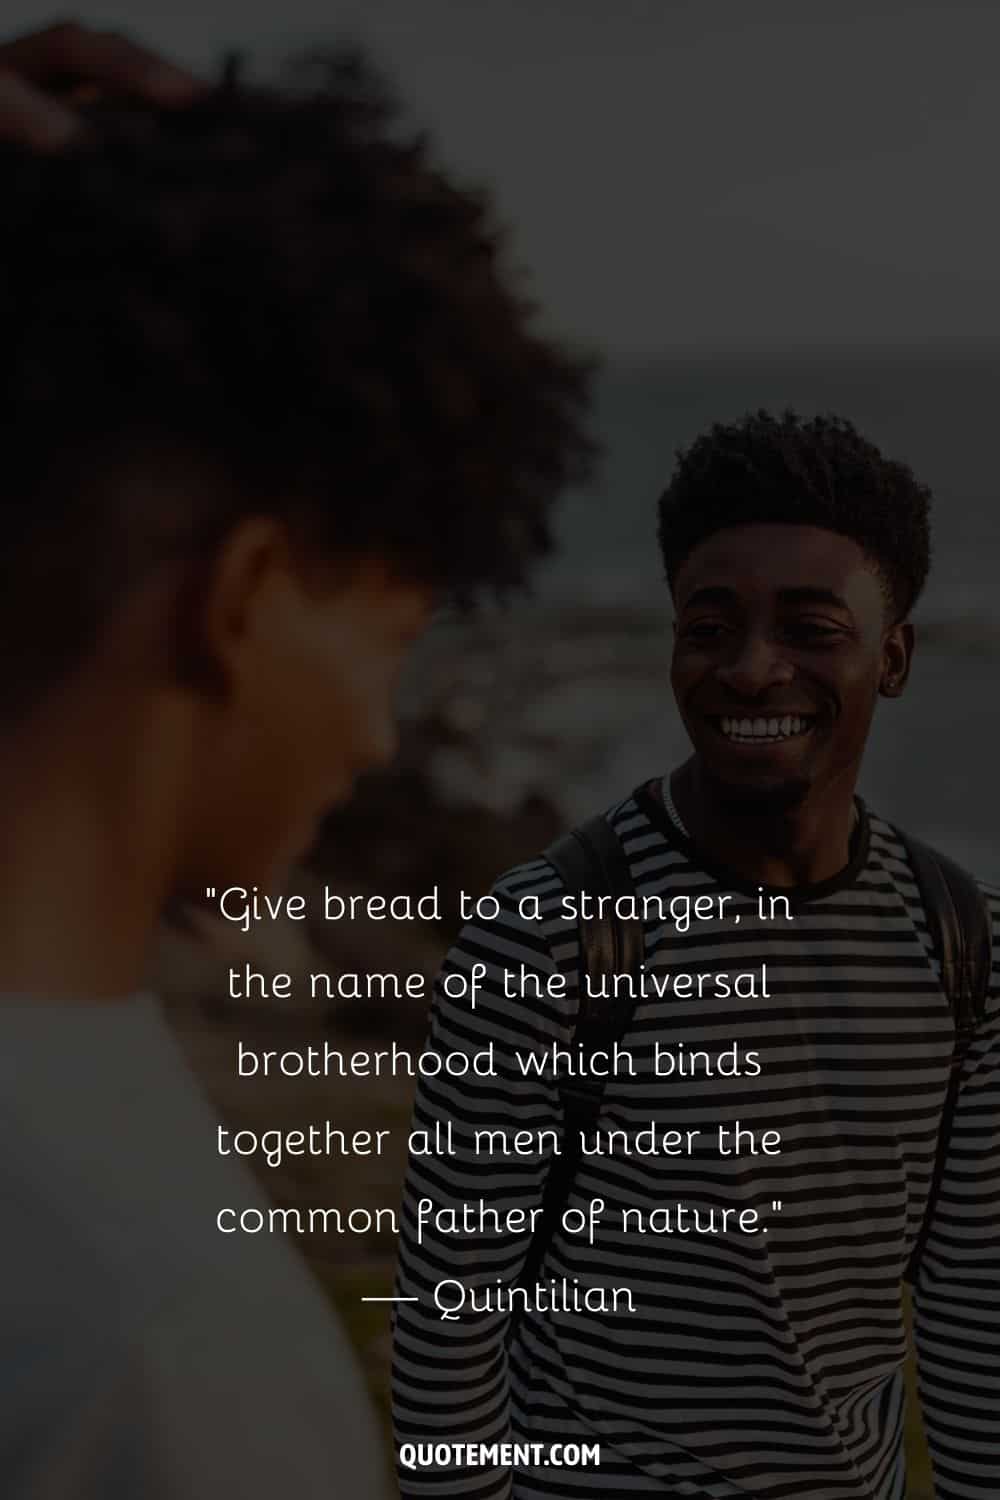 “Give bread to a stranger, in the name of the universal brotherhood which binds together all men under the common father of nature.” — Quintilian